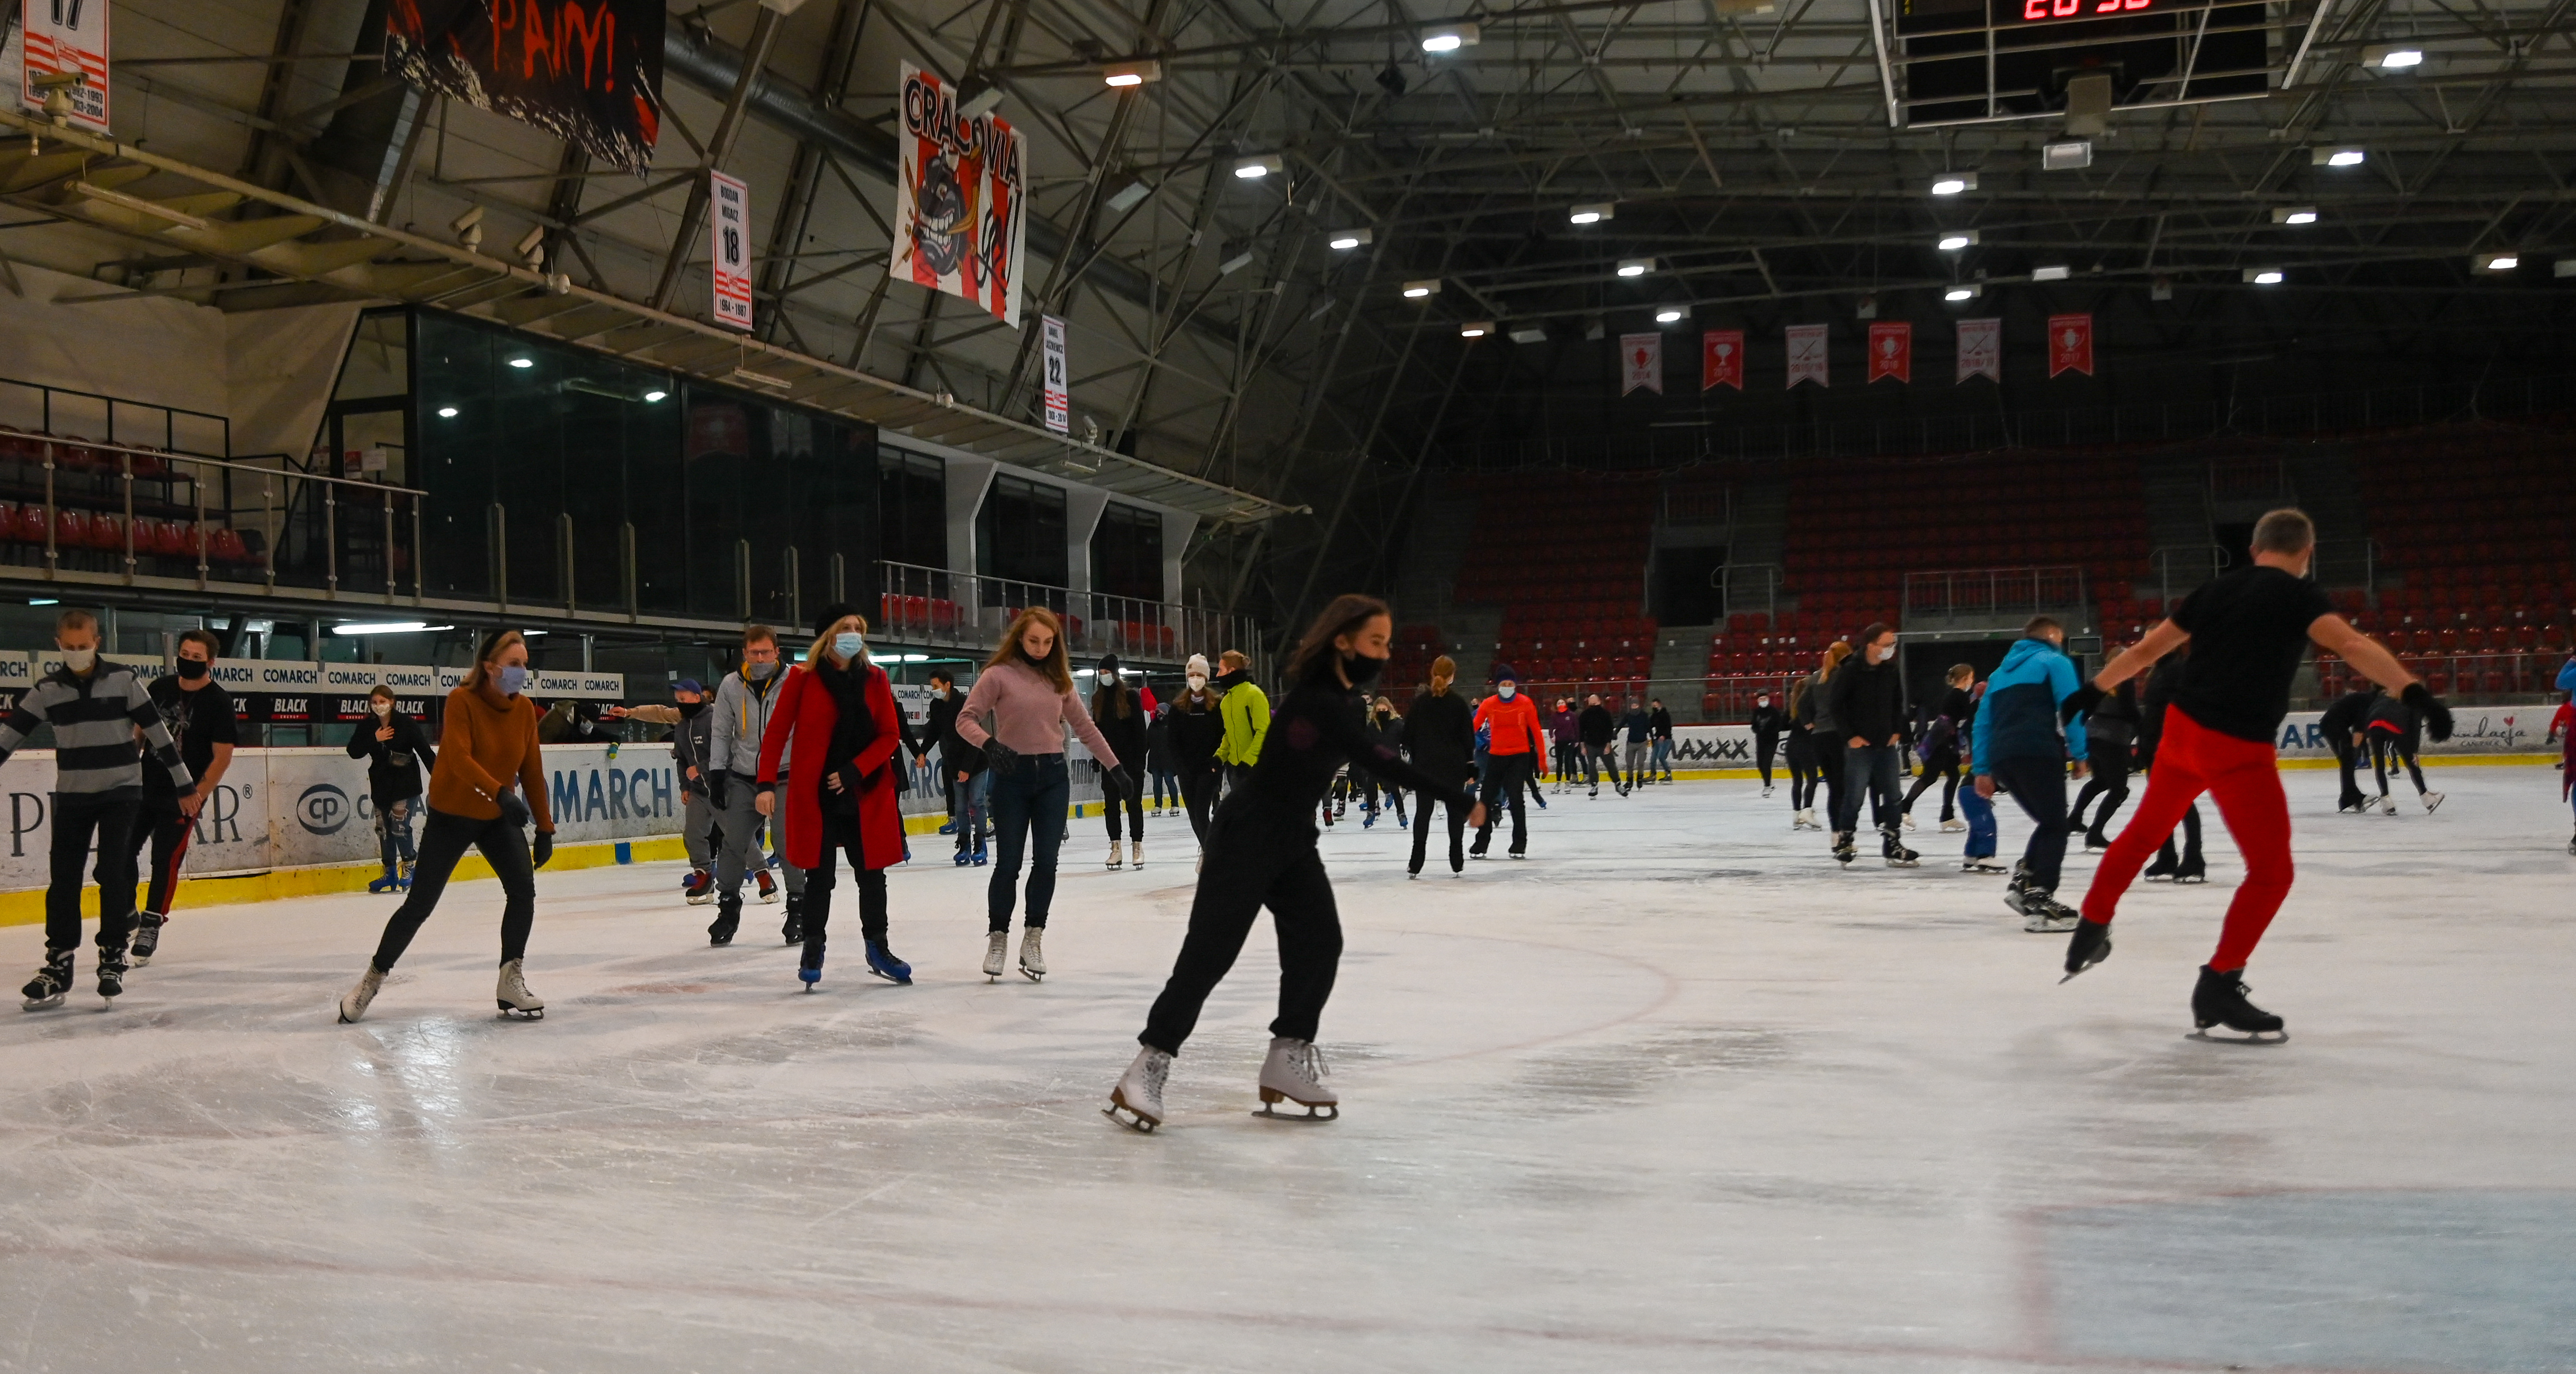 Ice skating sessions cancelled